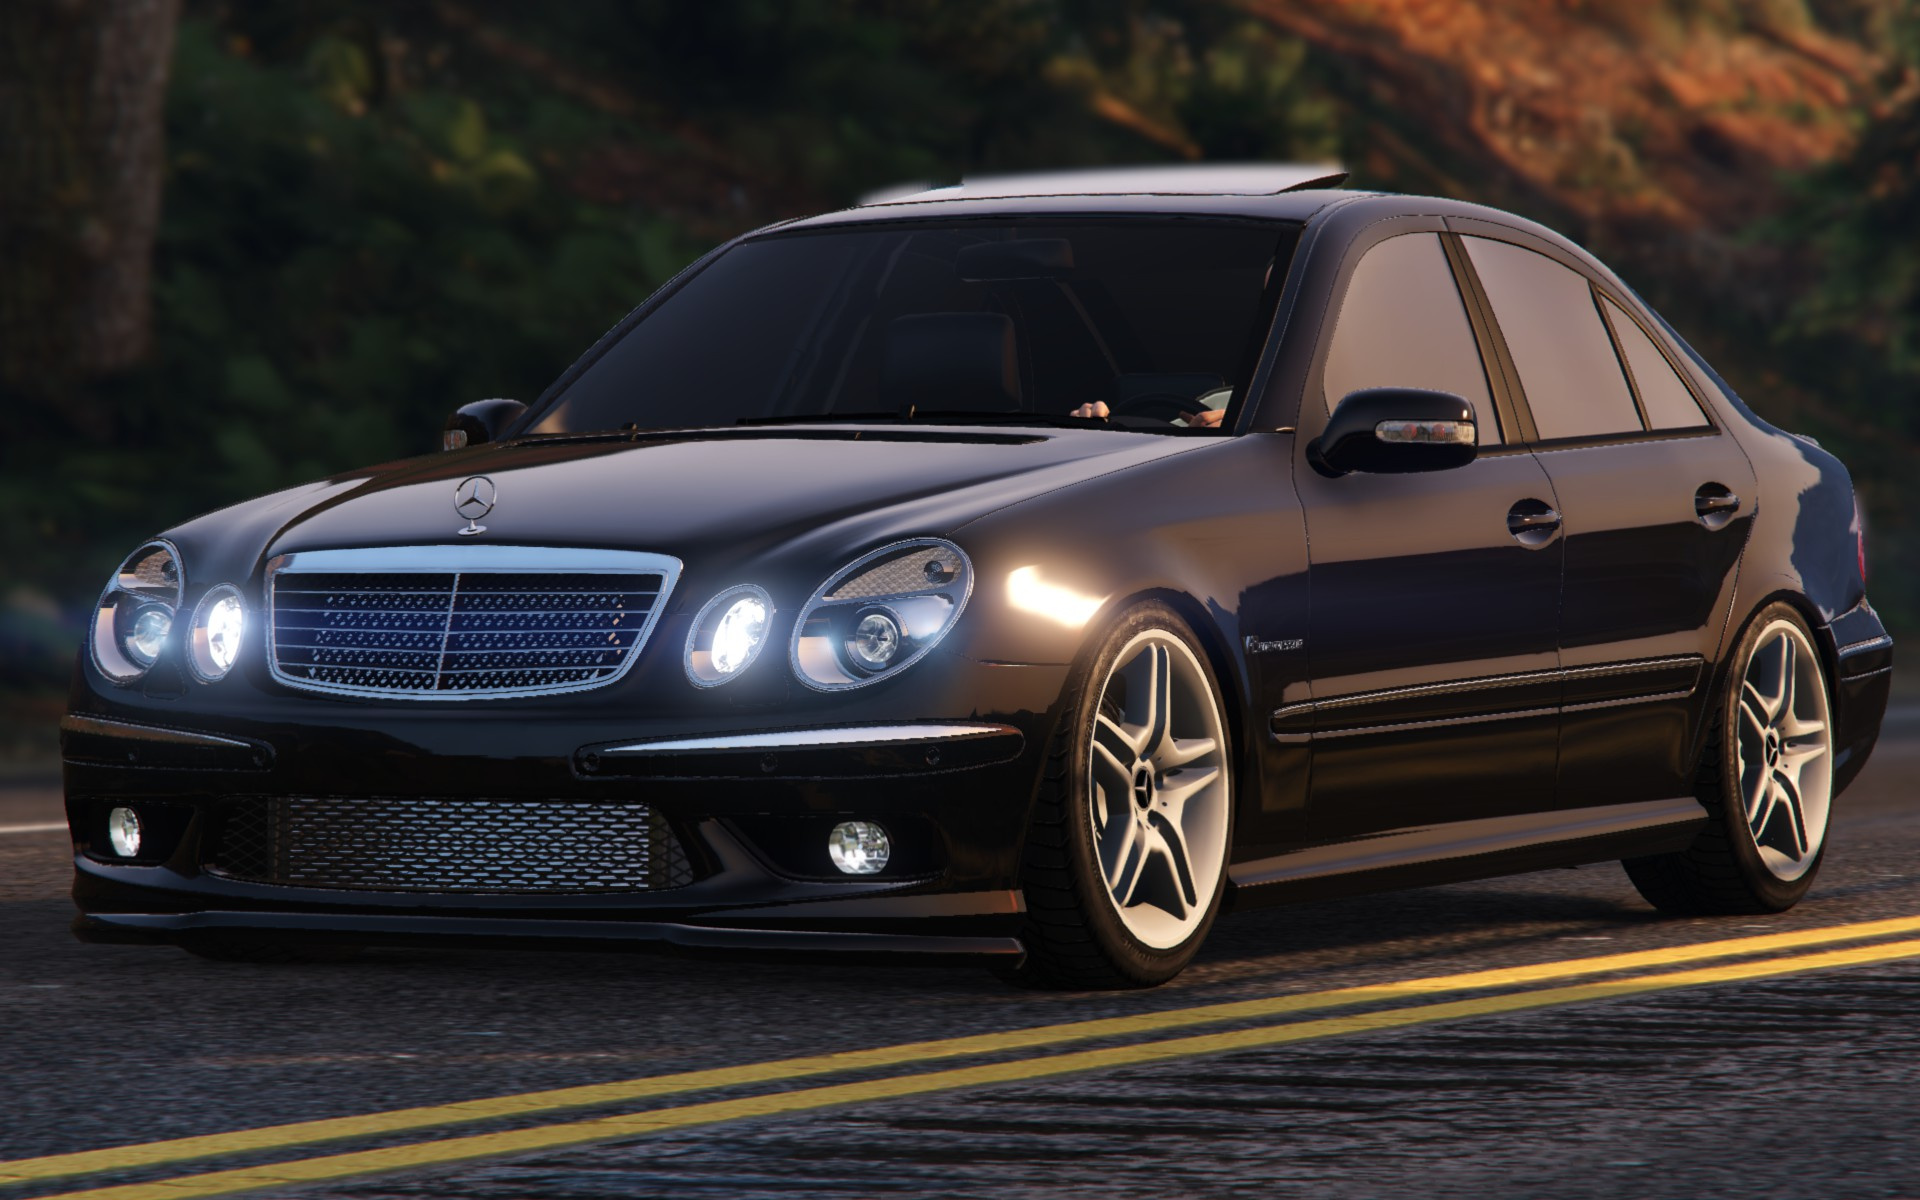 https://img.gta5-mods.com/q95/images/mercedes-benz-e55-amg-add-on-replace-tuning-realistic-sound-handling/8e4c26-20230210021149_1.jpg